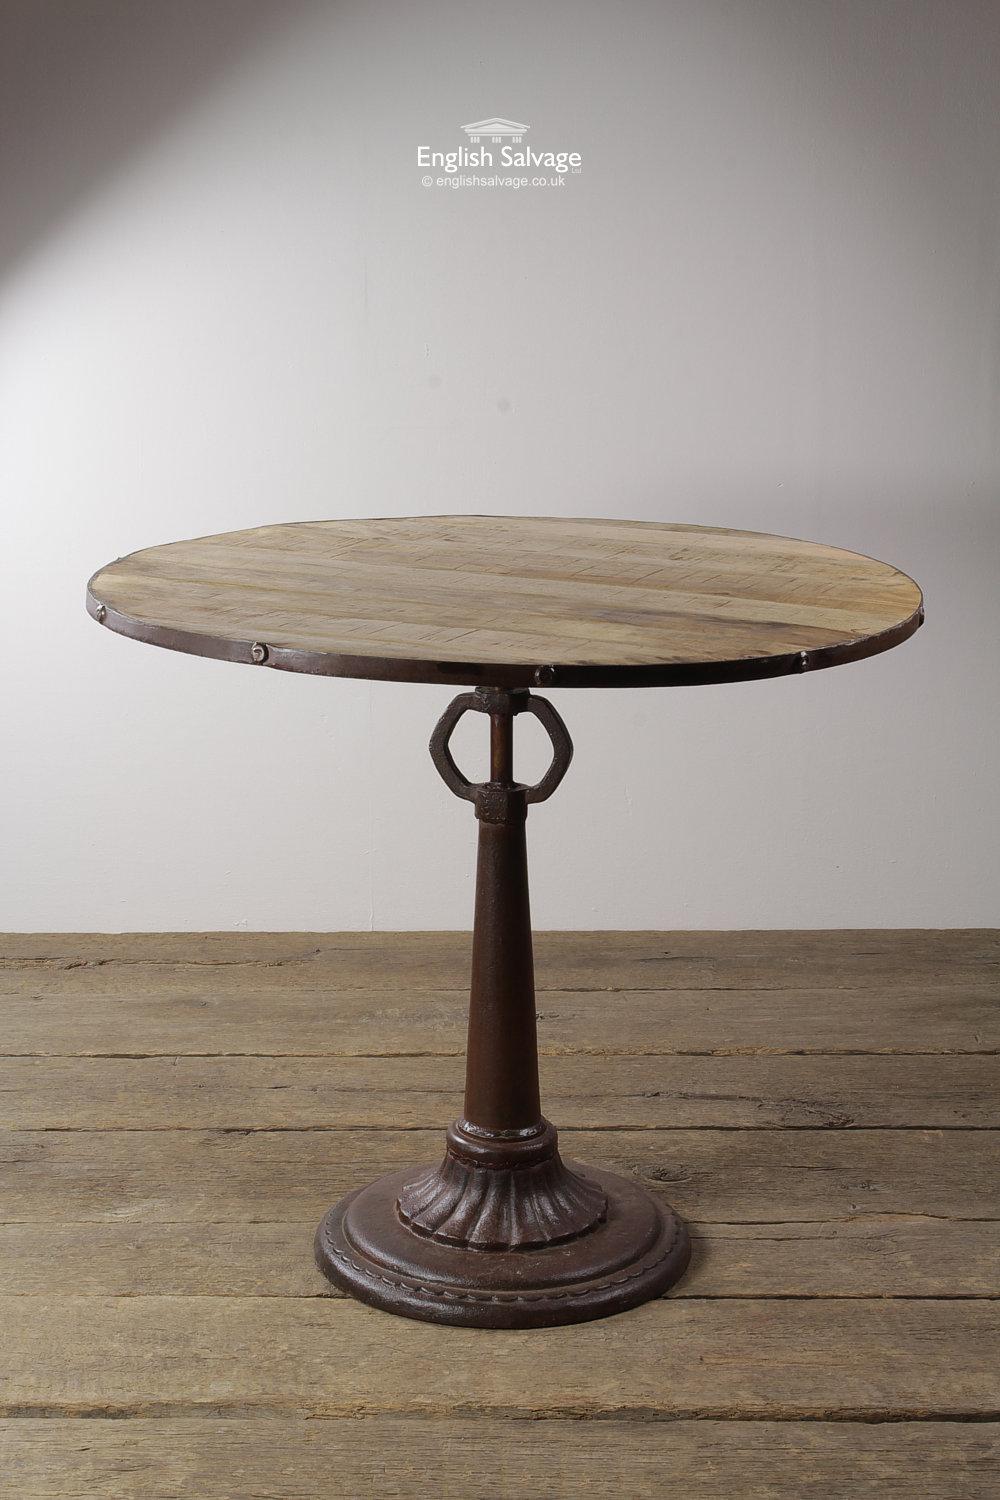 New table with a round teak plank top and a flared or skirted metal base. This vintage industrial style piece would be great for a cafe or home kitchen. The table assembles in two pieces, the wood top screws on to the base.

Good, solid condition.